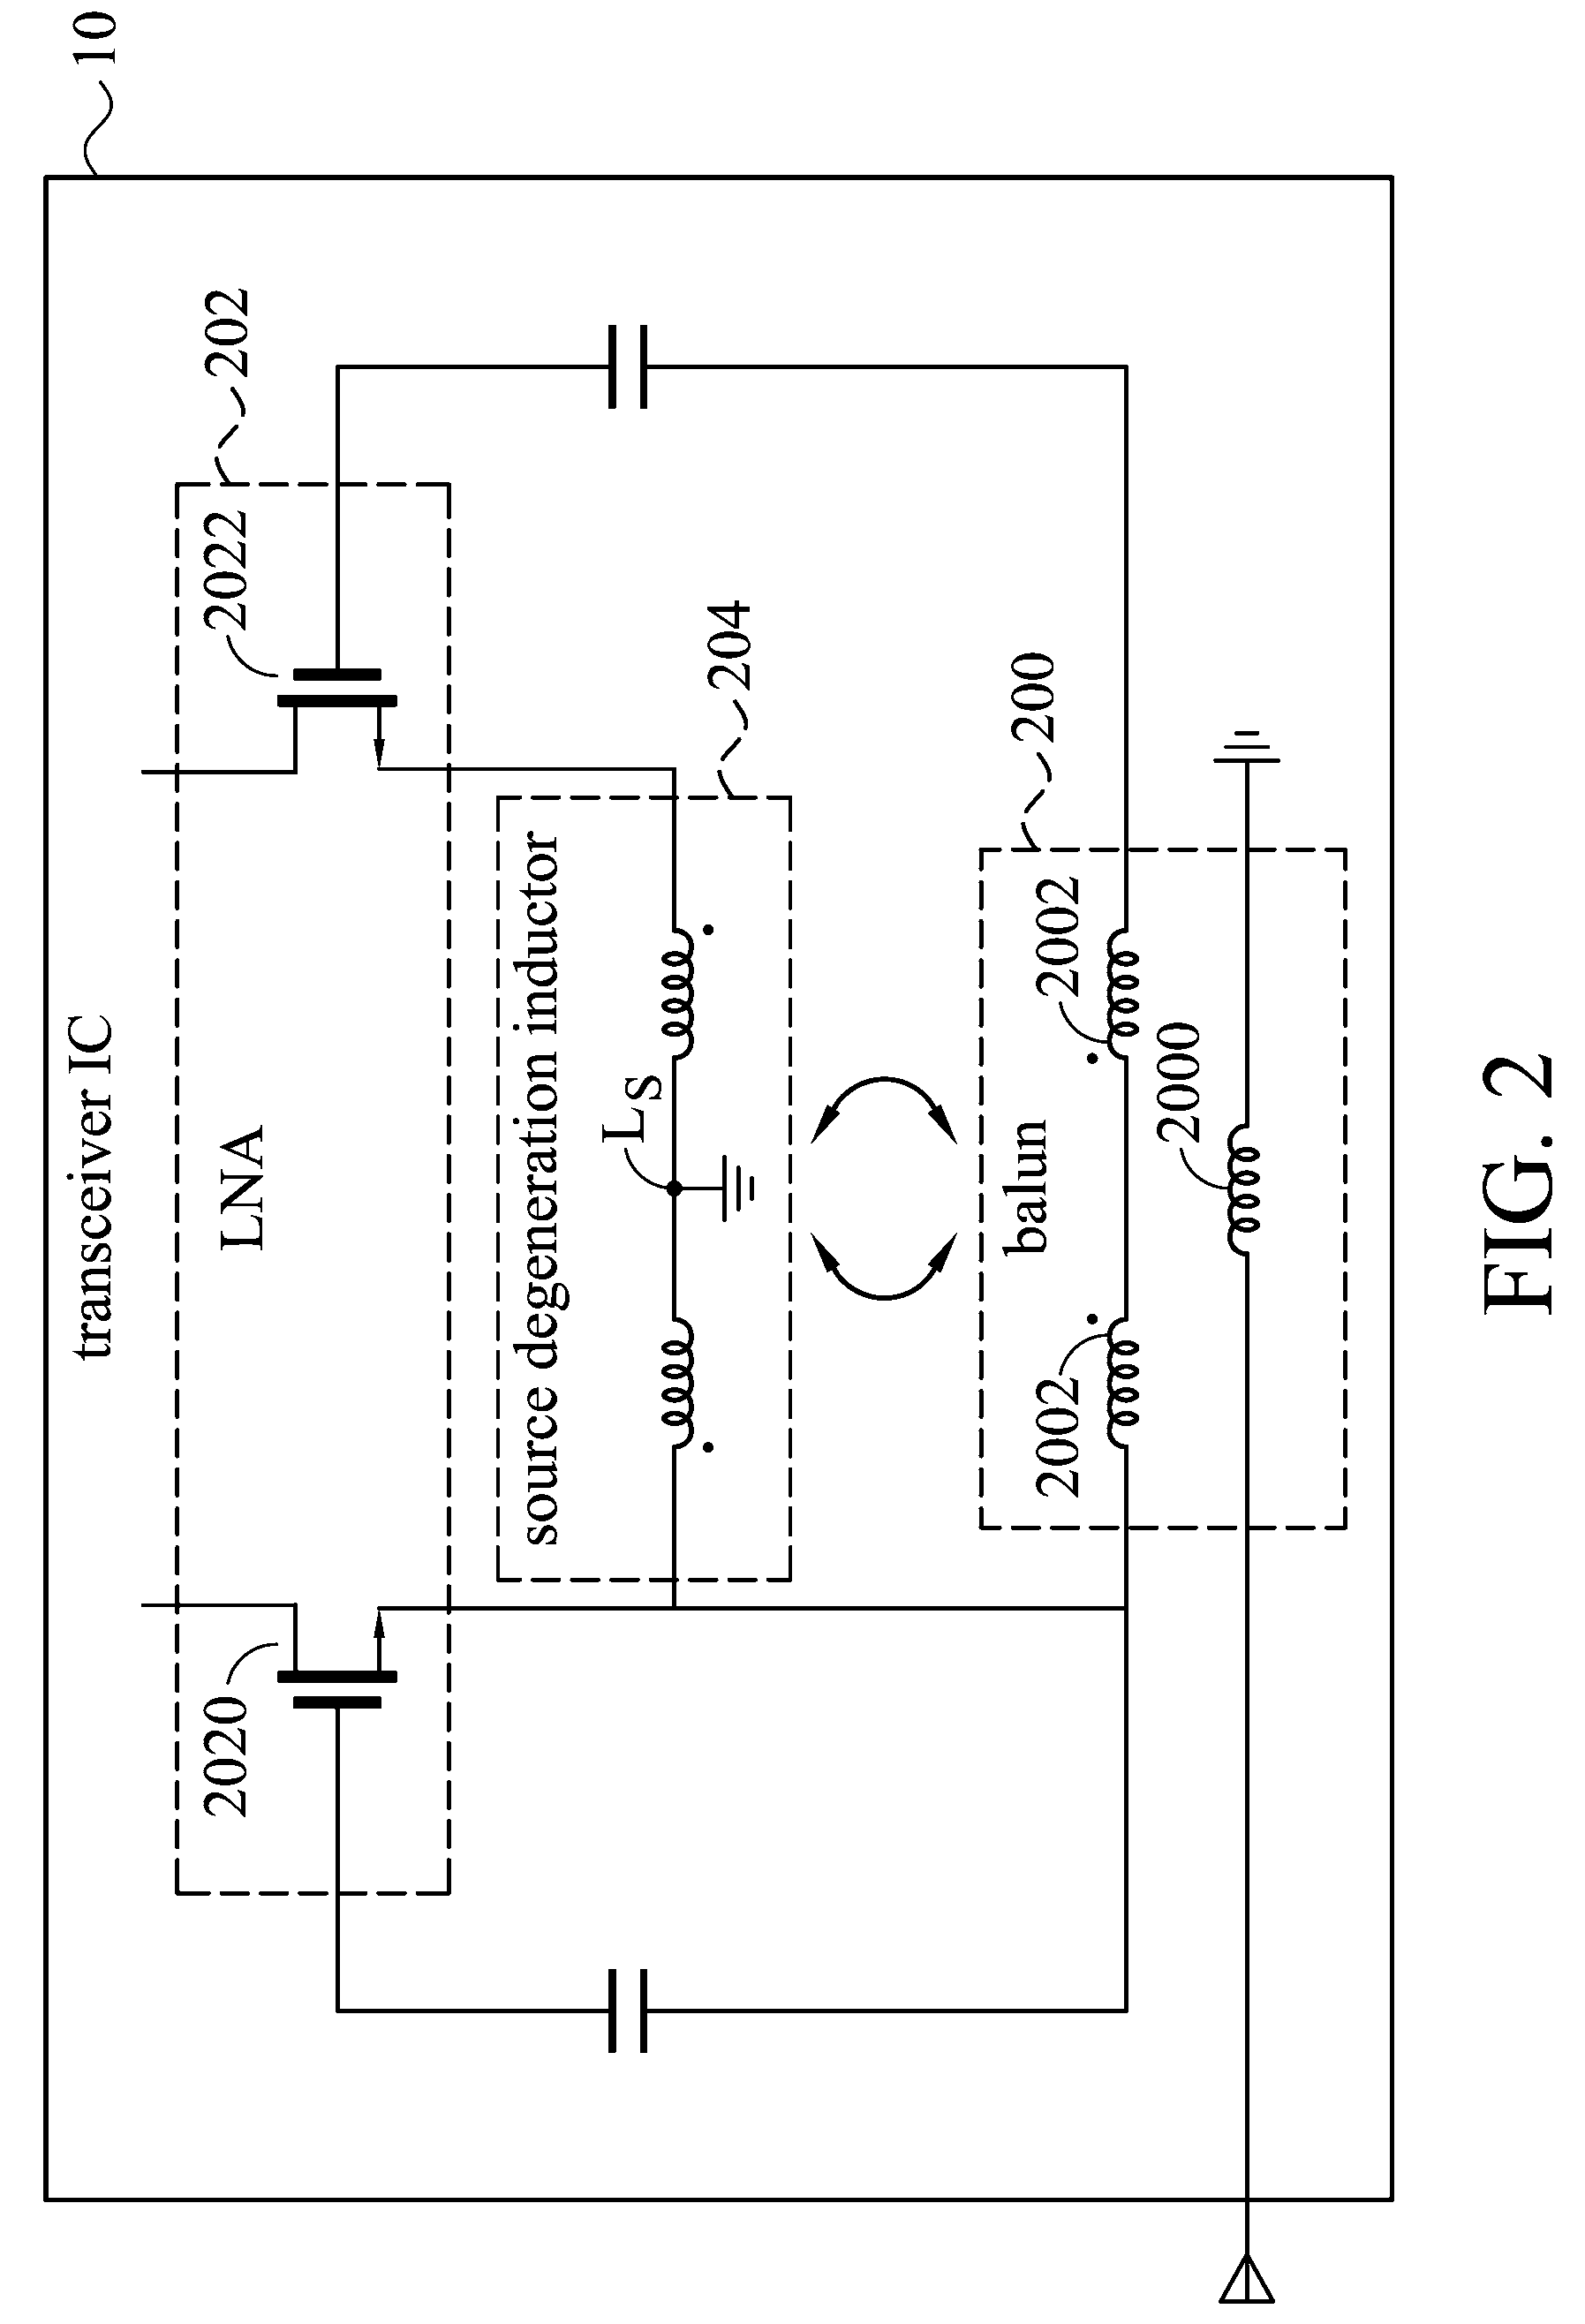 Transceiver and integrated circuit